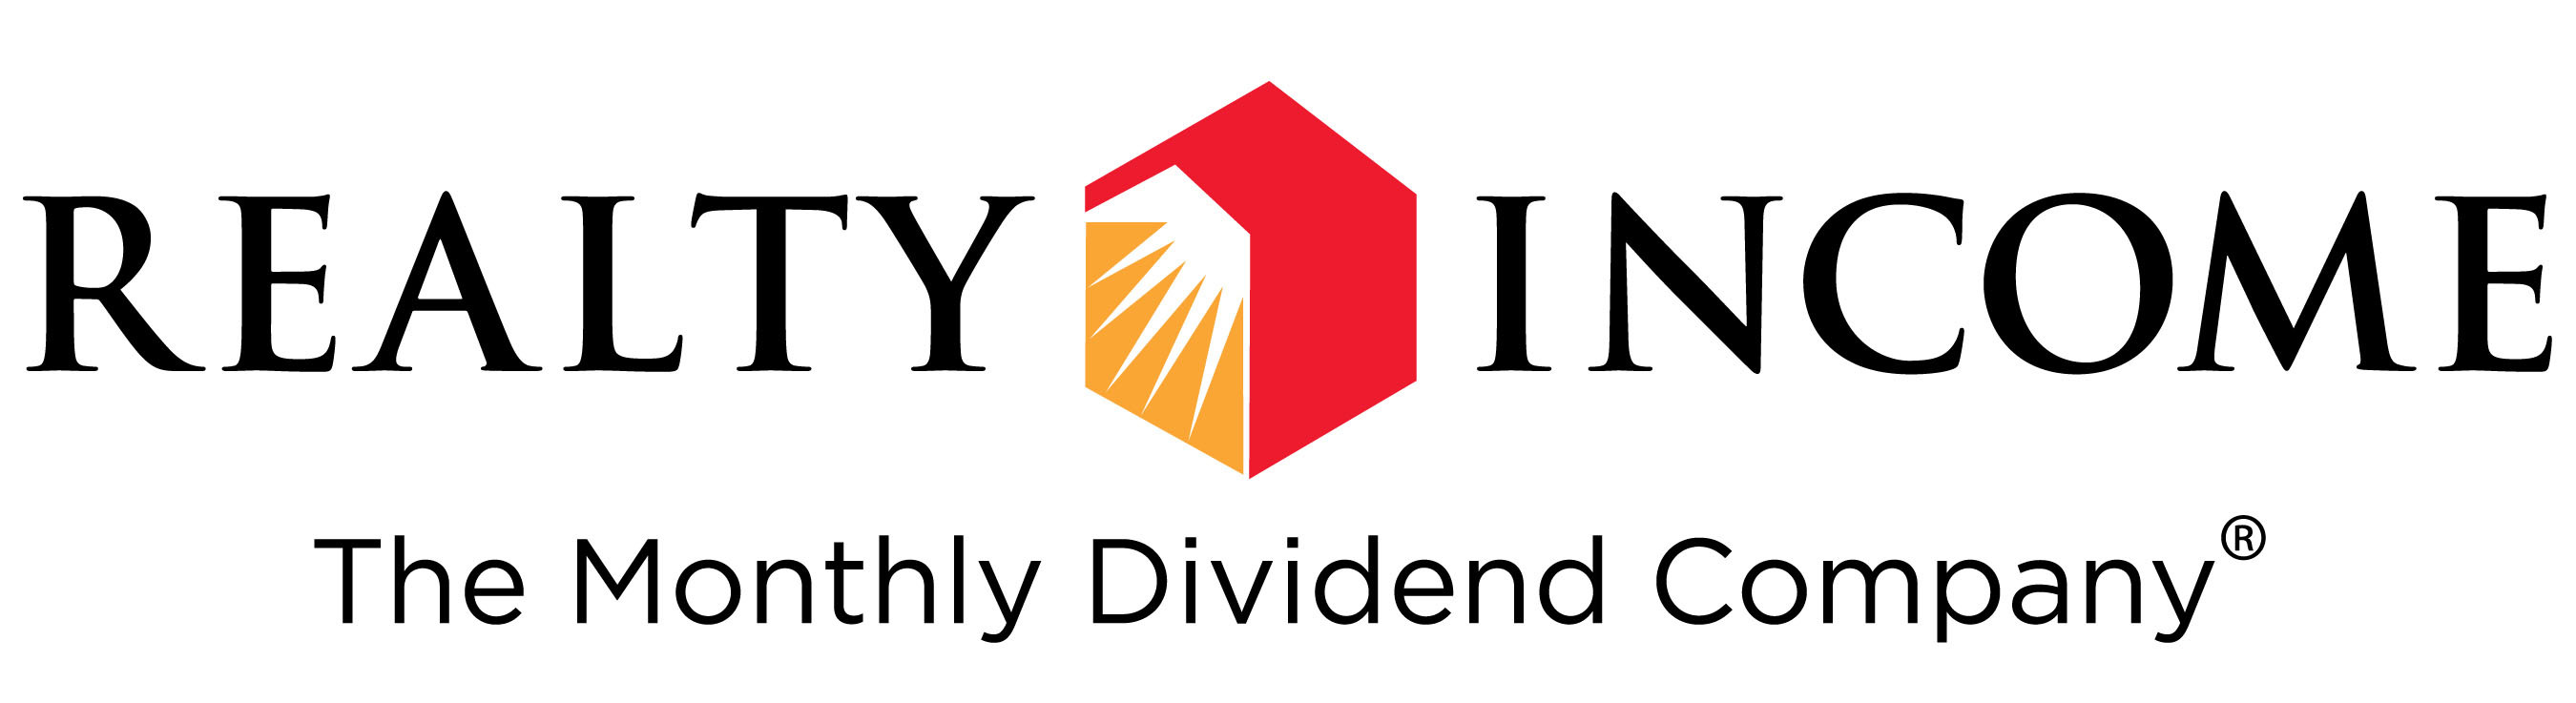 Realty Income Corporation - The Monthly Dividend Company. (PRNewsFoto/Realty Income Corporation) (PRNewsFoto/)